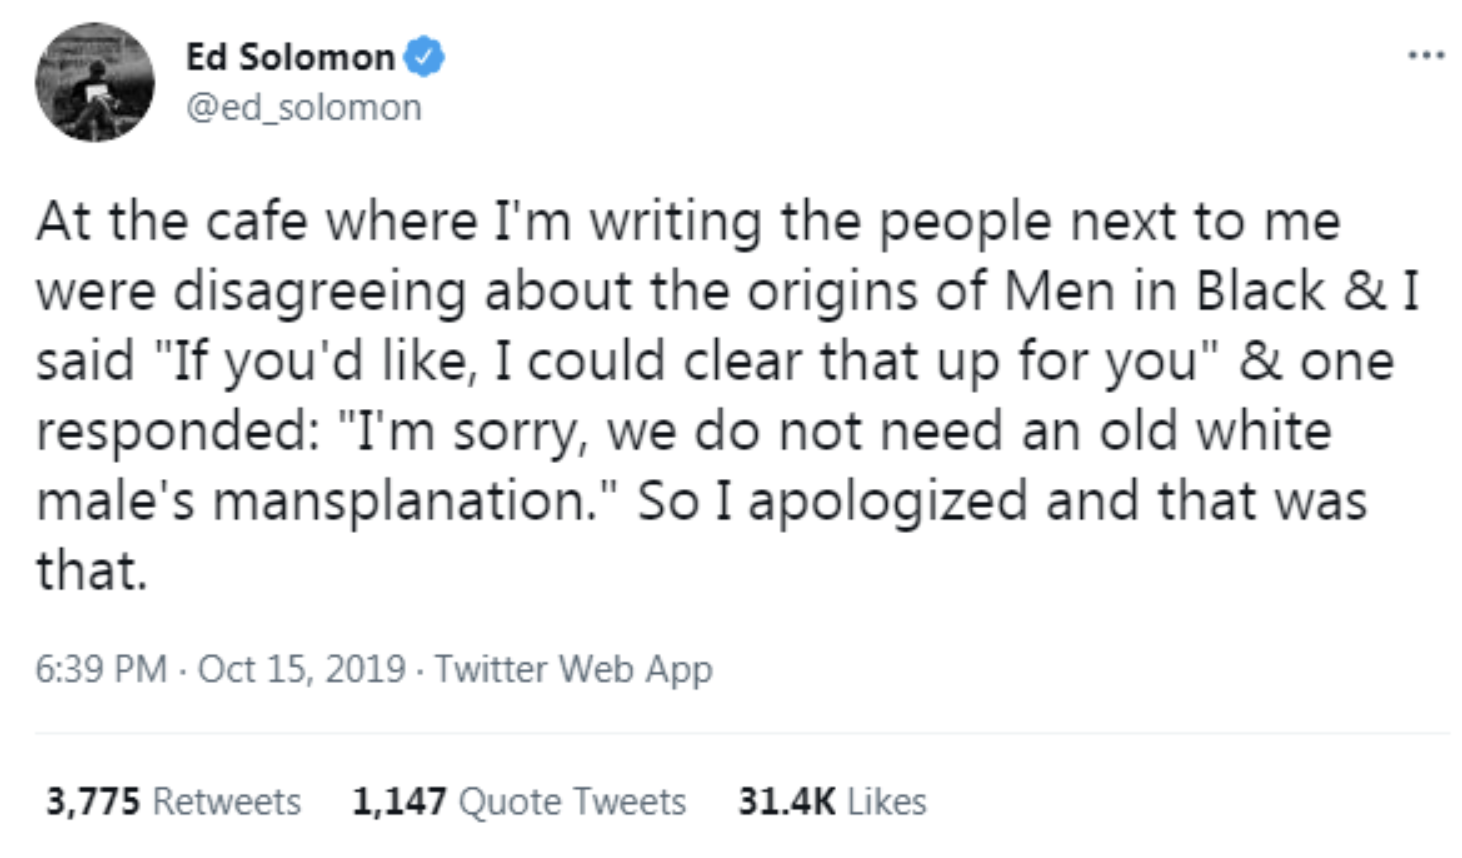 Cringey Fails - professor tweet about queen - Ed Solomon ... At the cafe where I'm writing the people next to me were disagreeing about the origins of Men in Black & I said